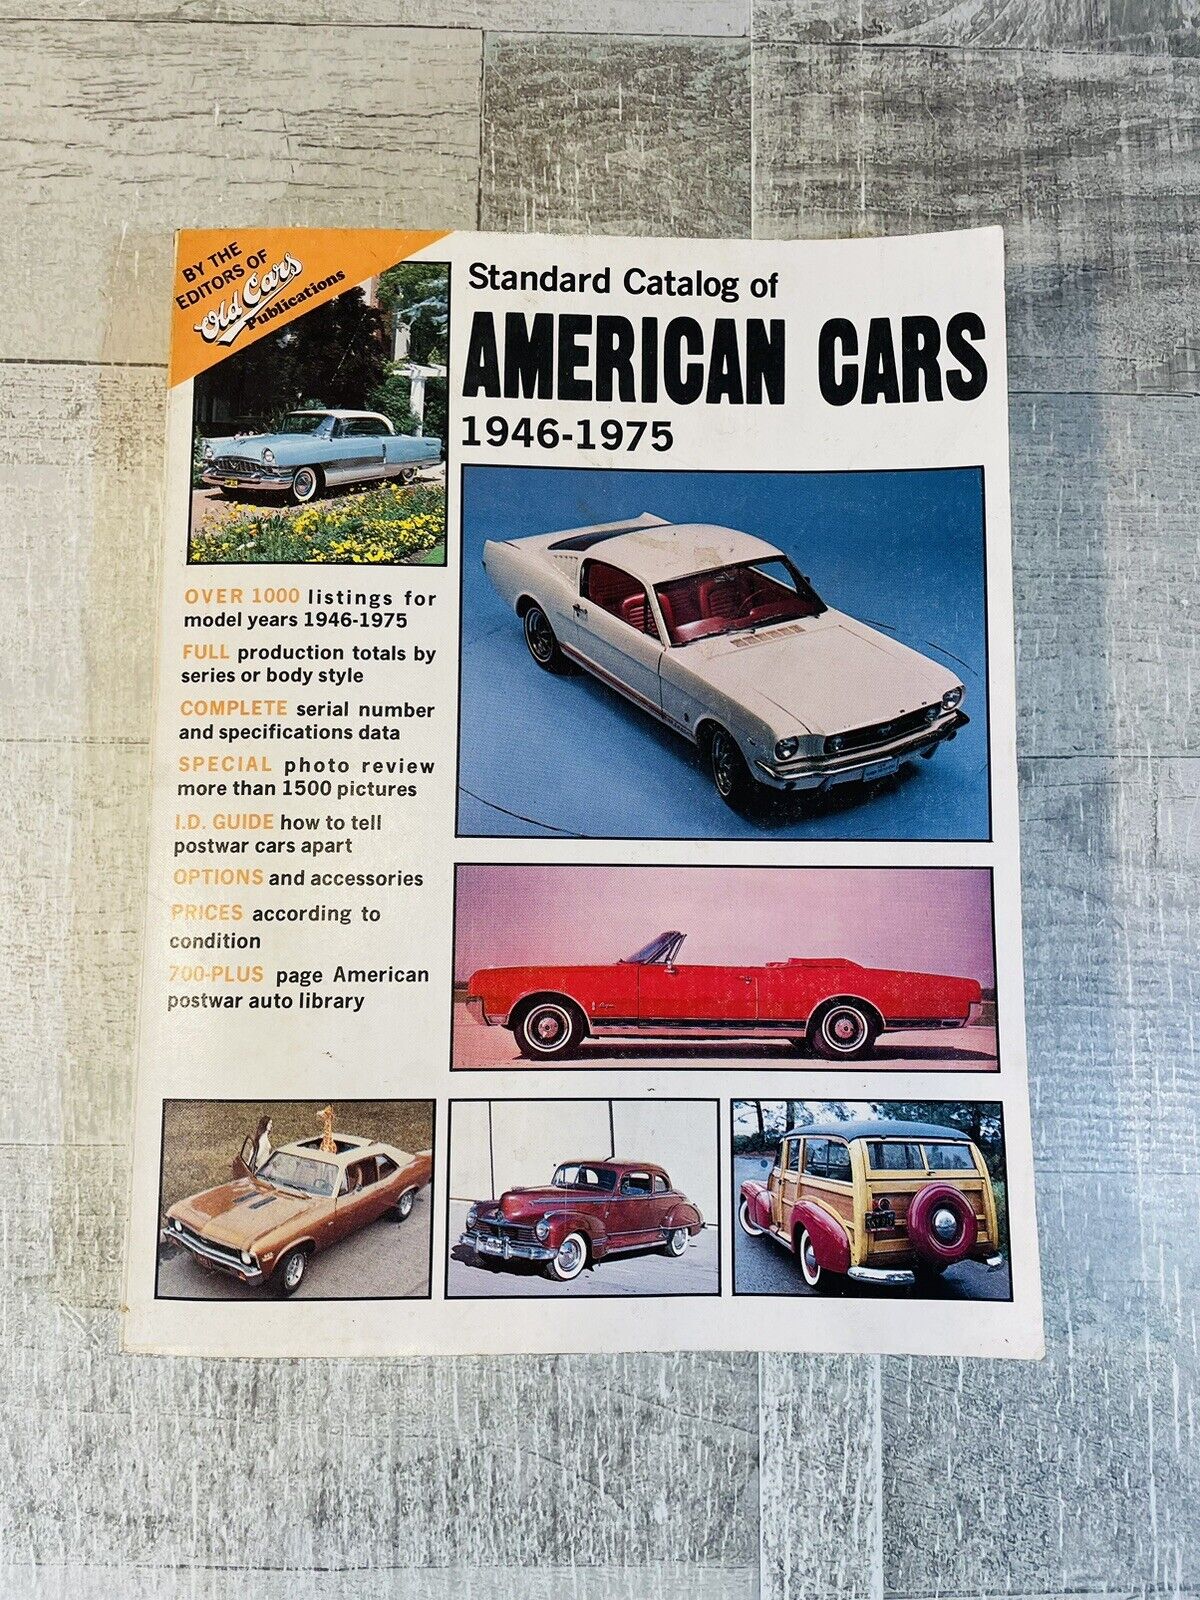 Standard Catalog of American Cars 1946-1975 Old Cars Publications